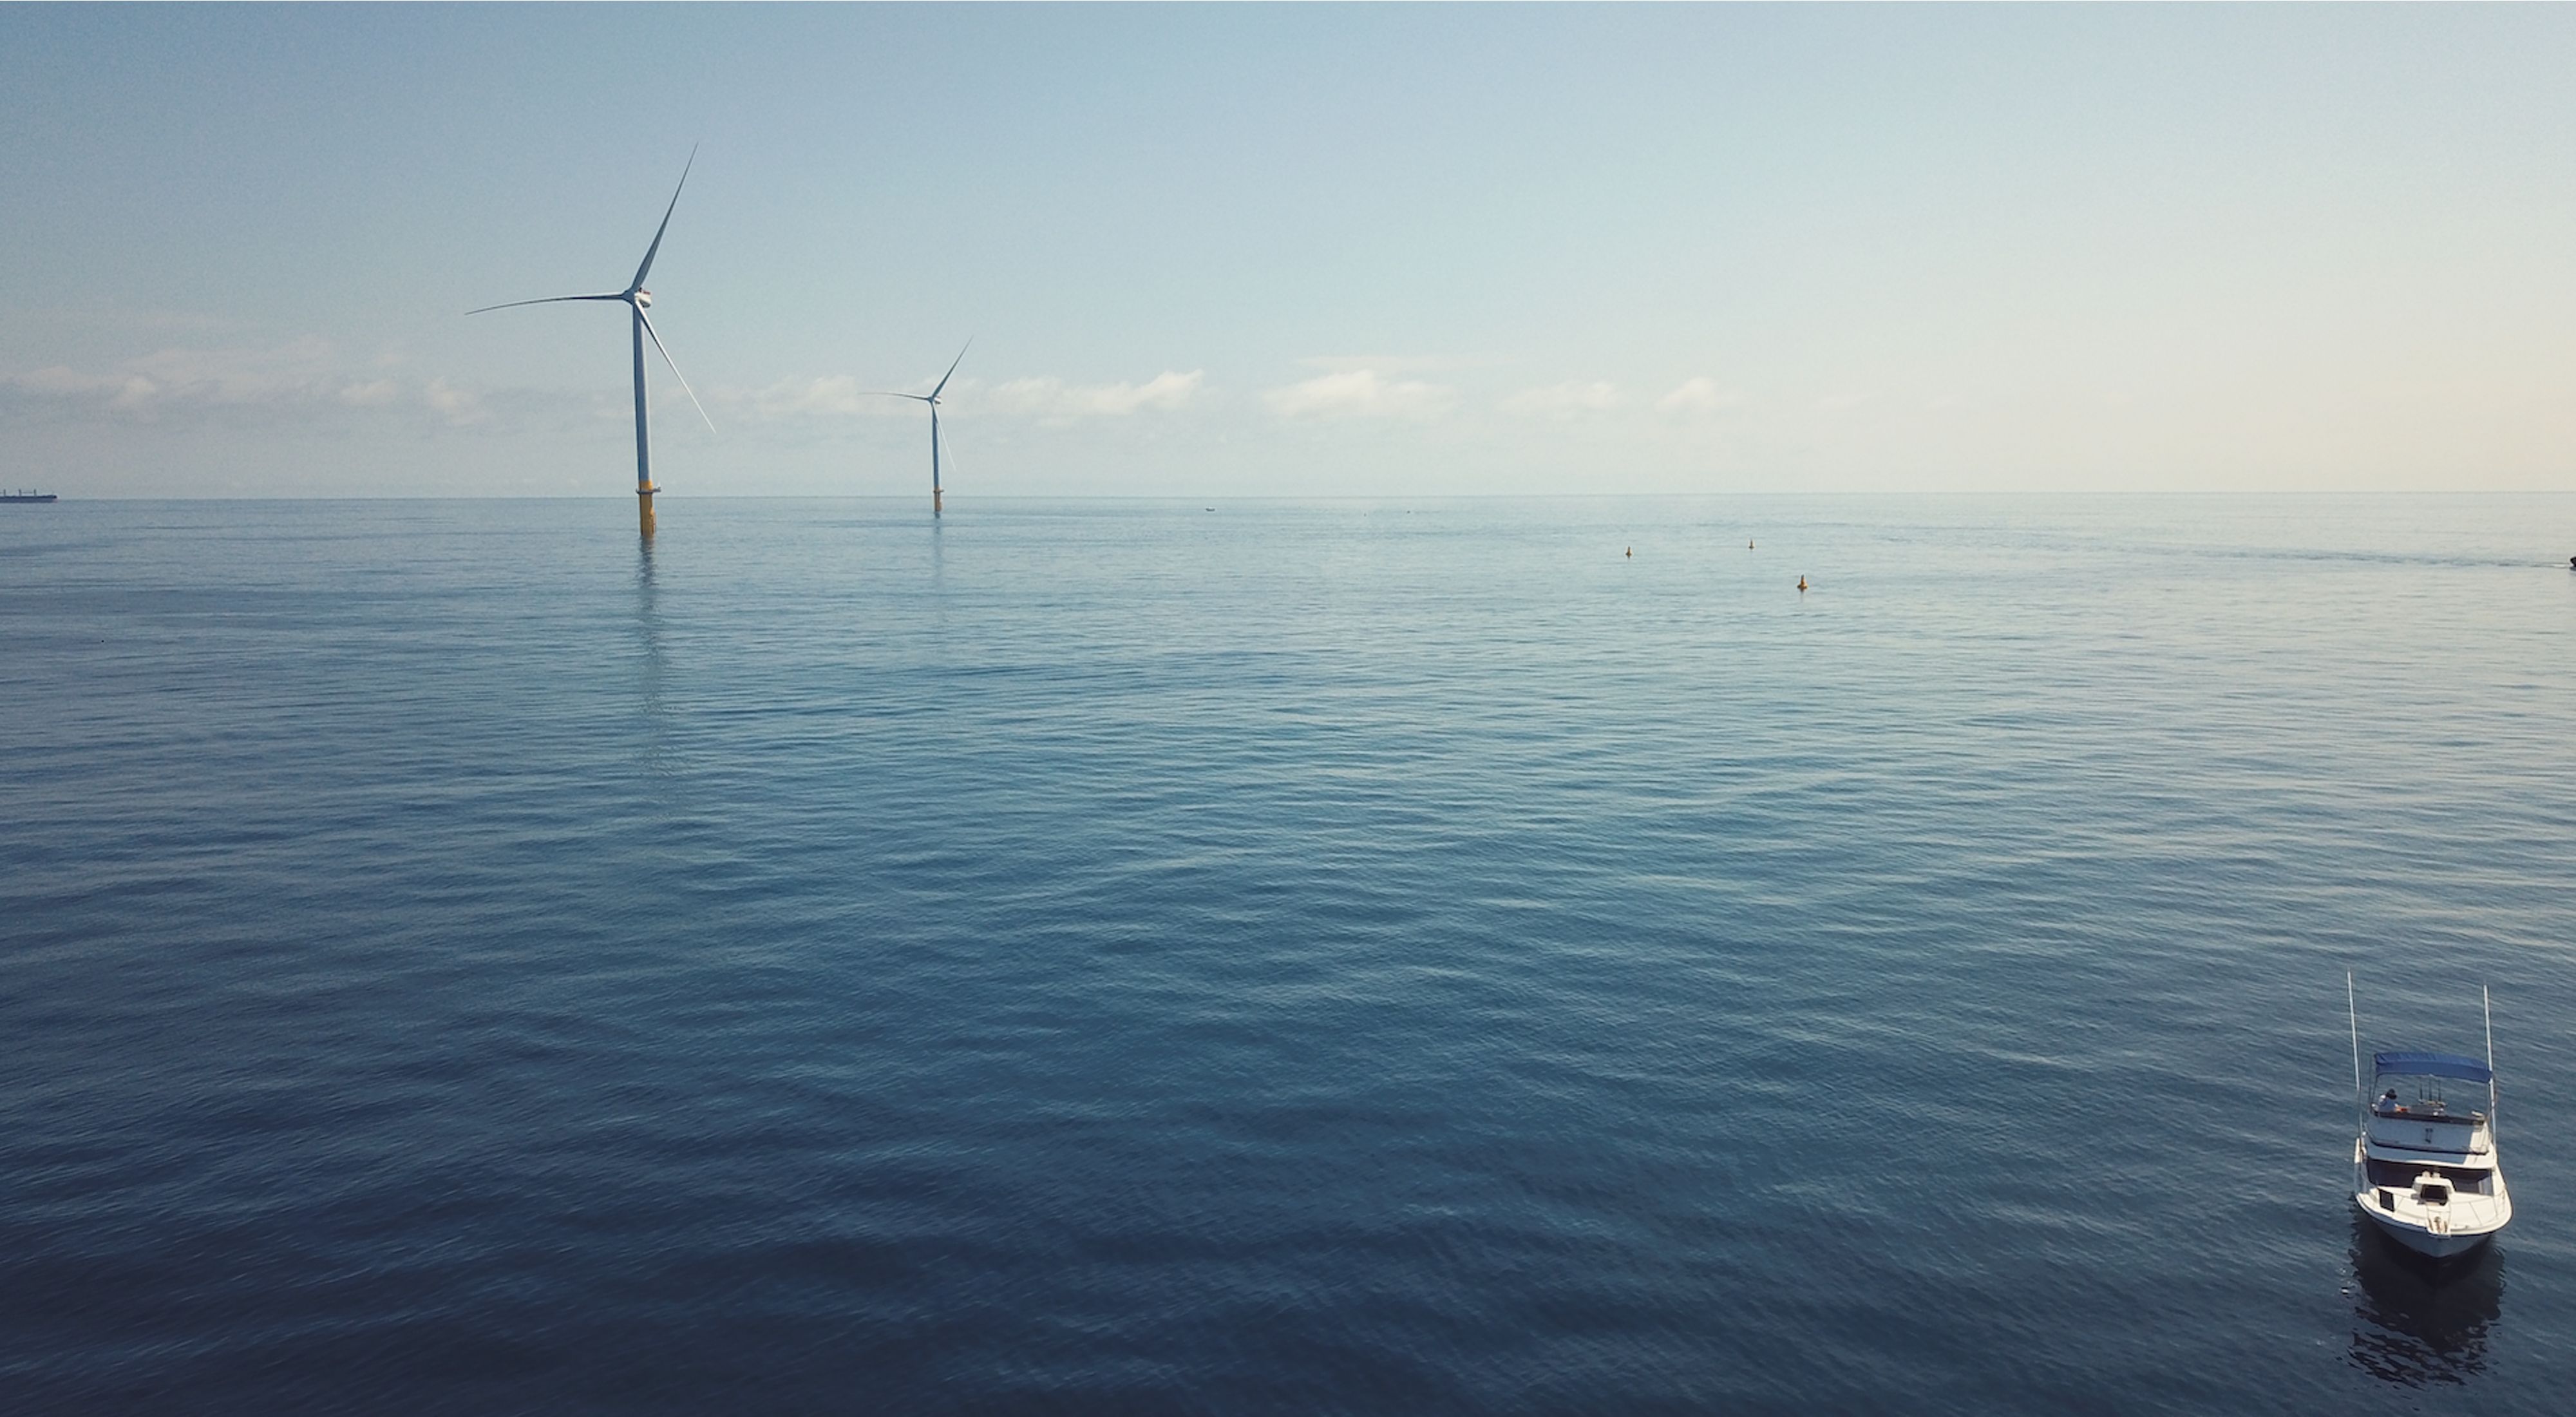 A aerial view of an ocean with wind turbines.